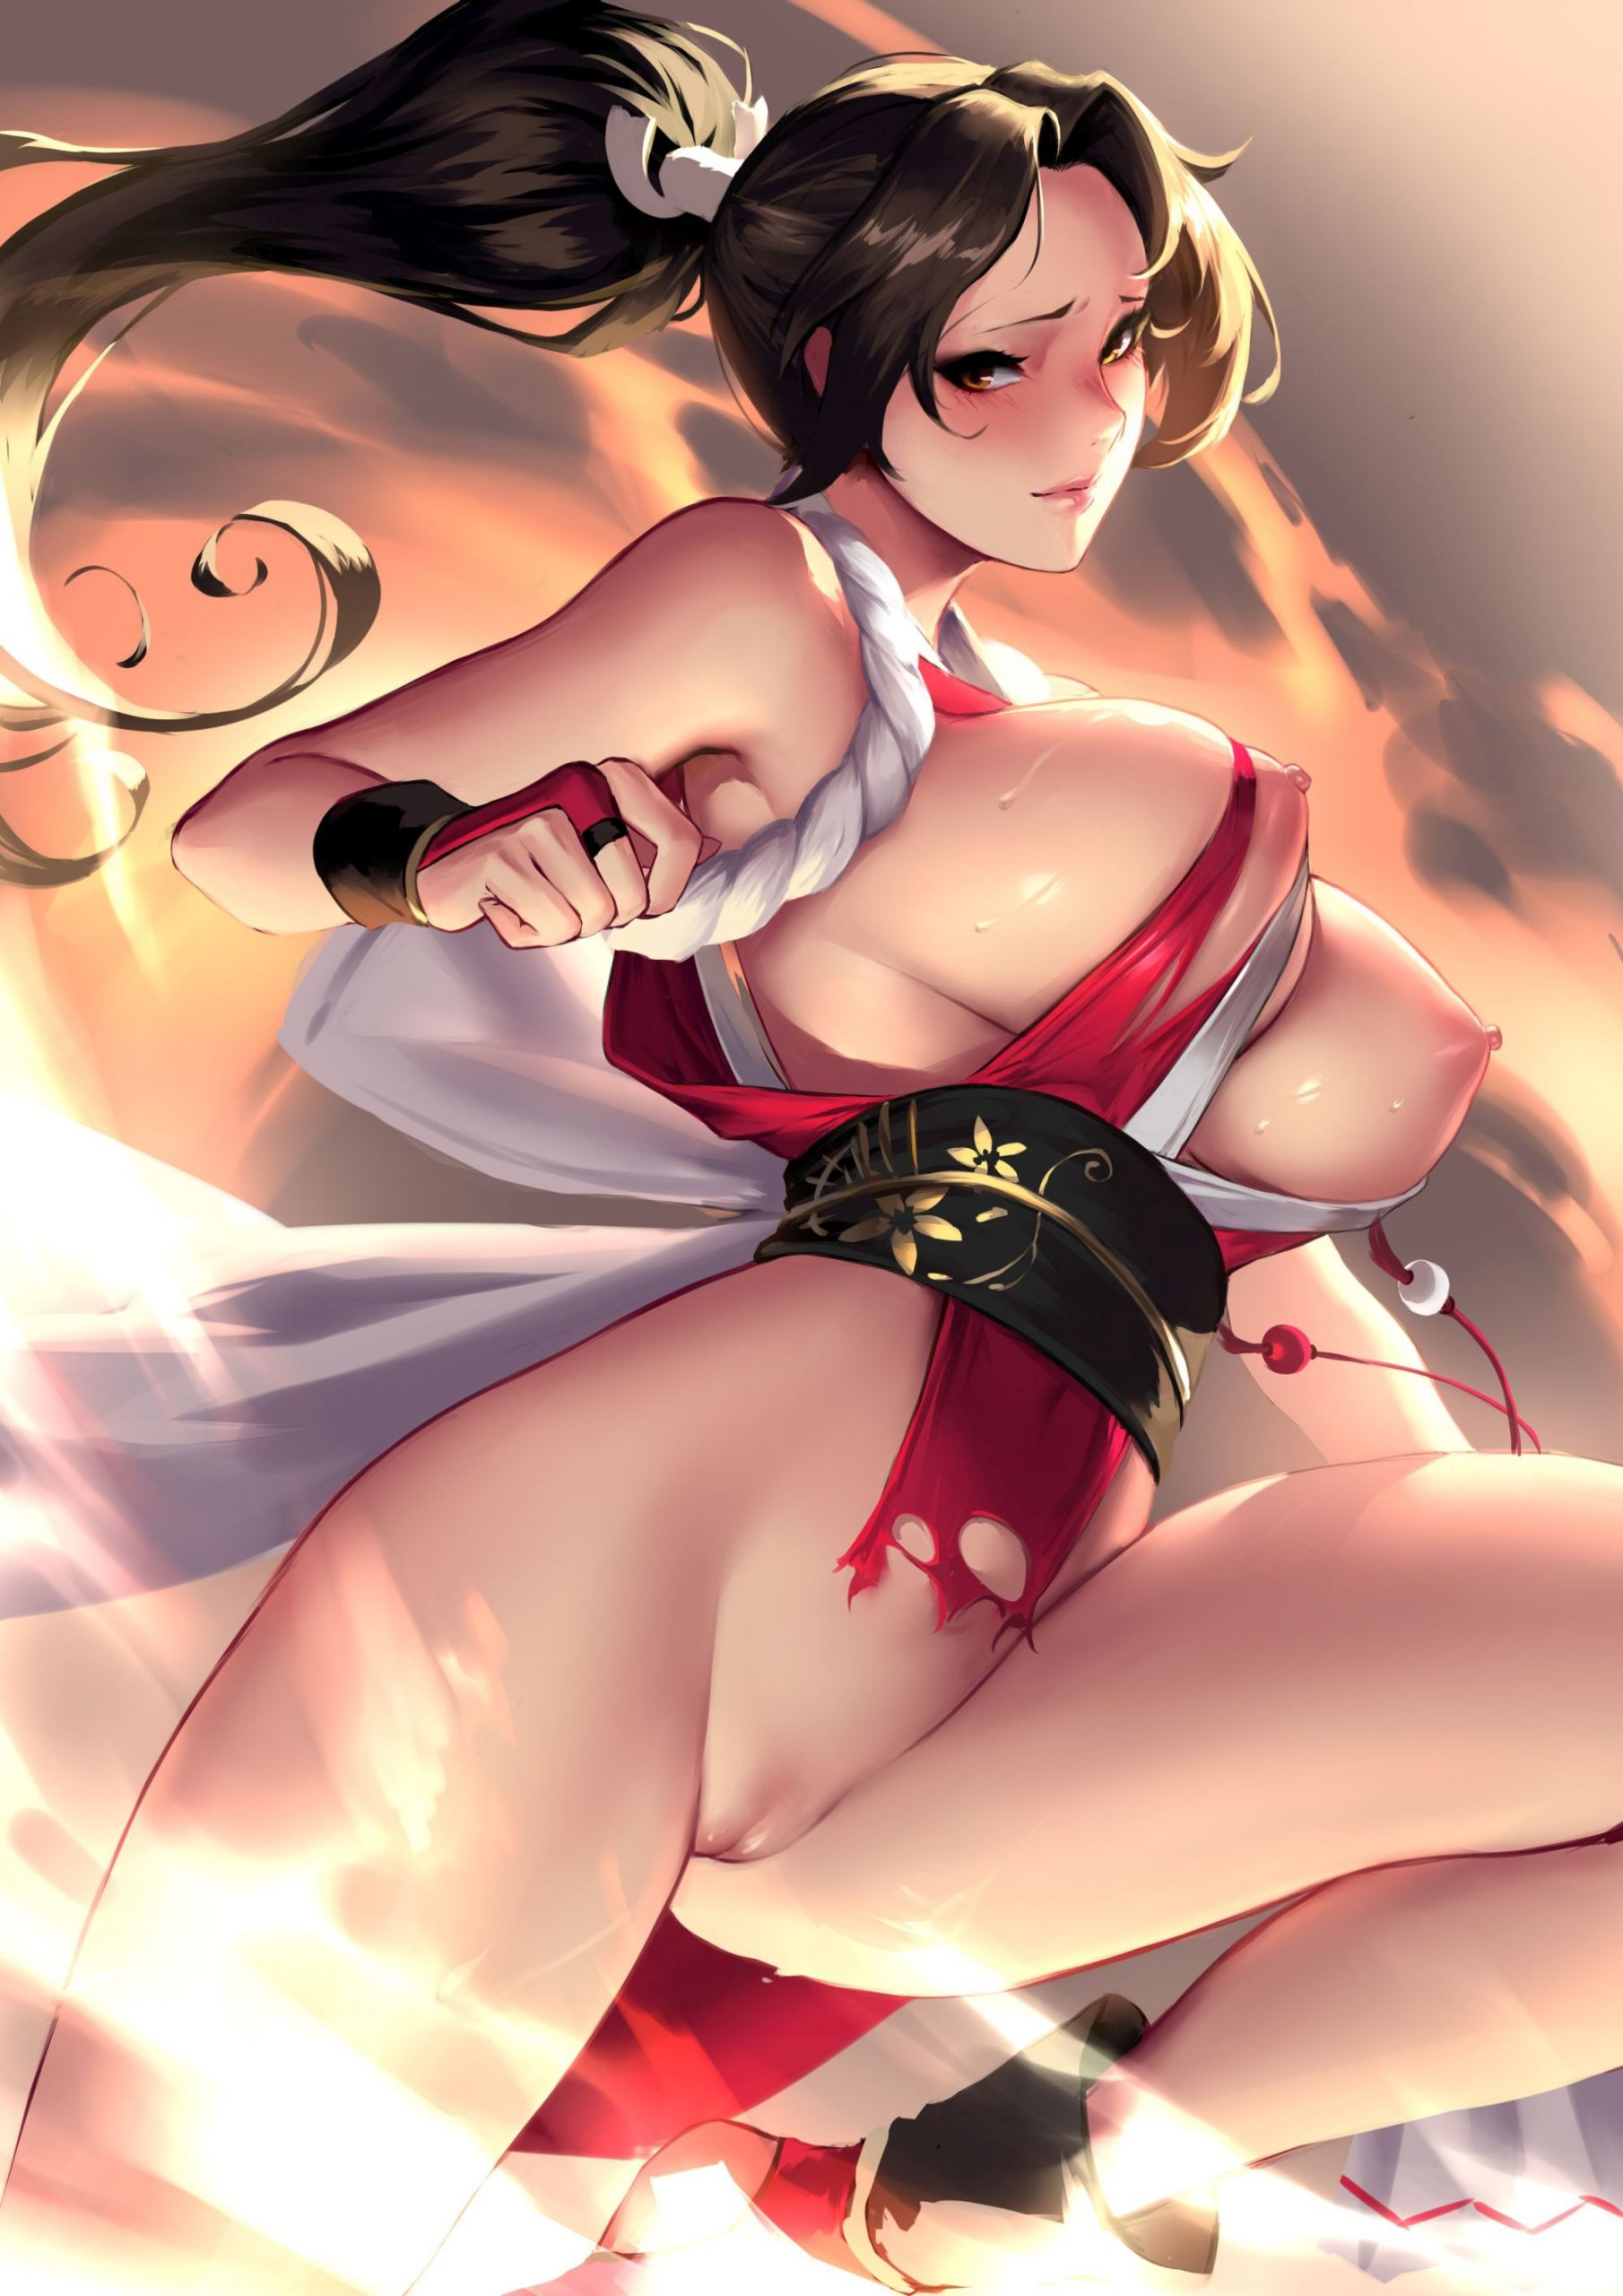 Ratman recomended queen fighter nude may shiranui